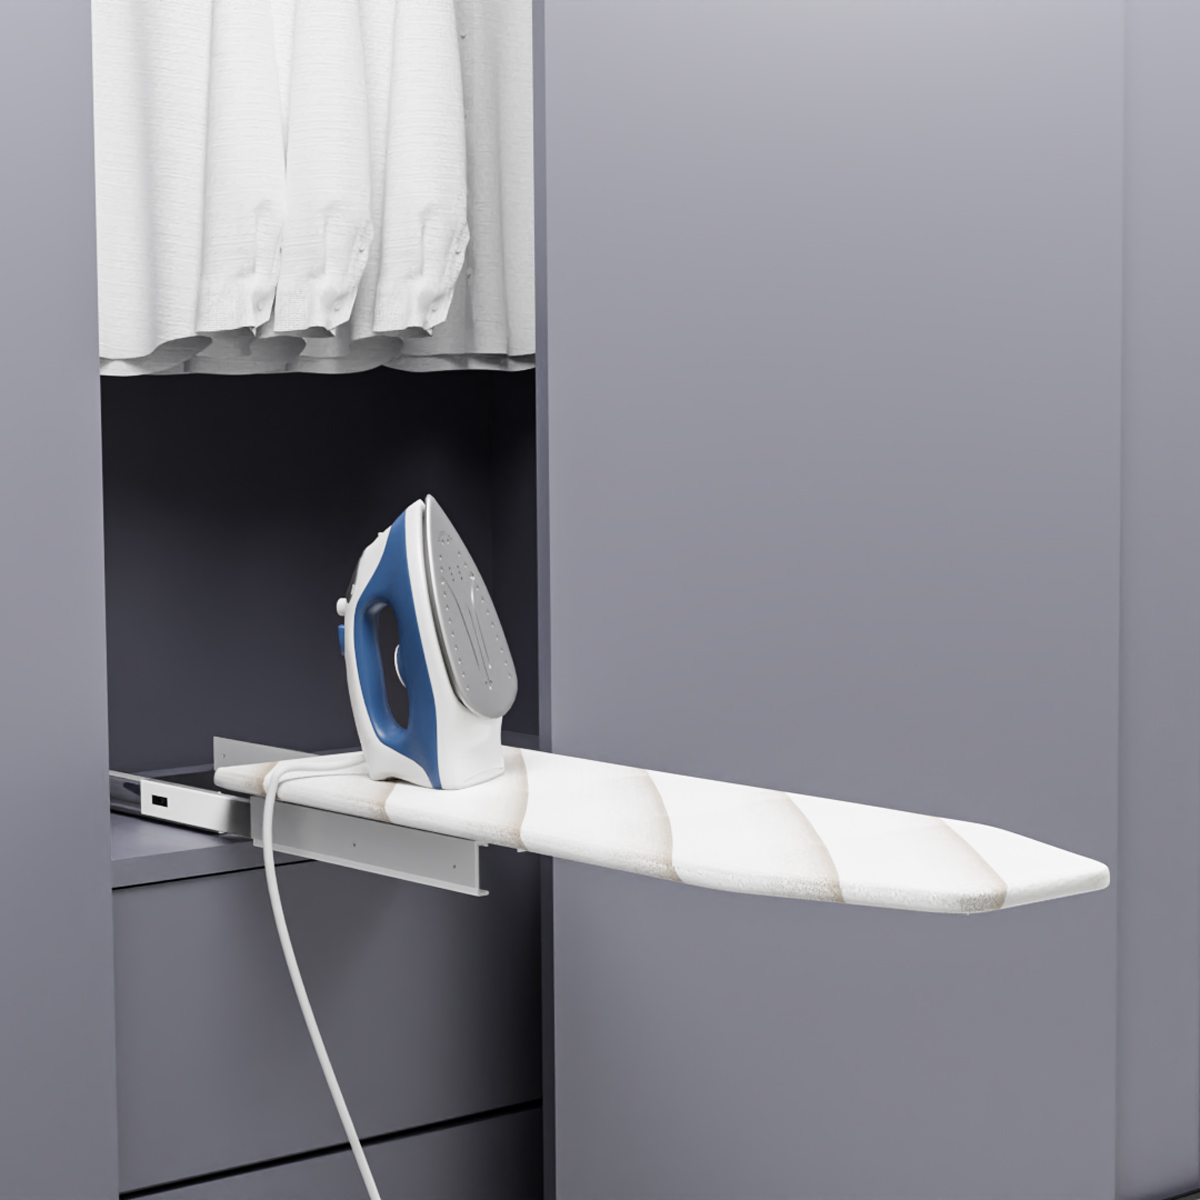 Folding Pull Out Ironing Board